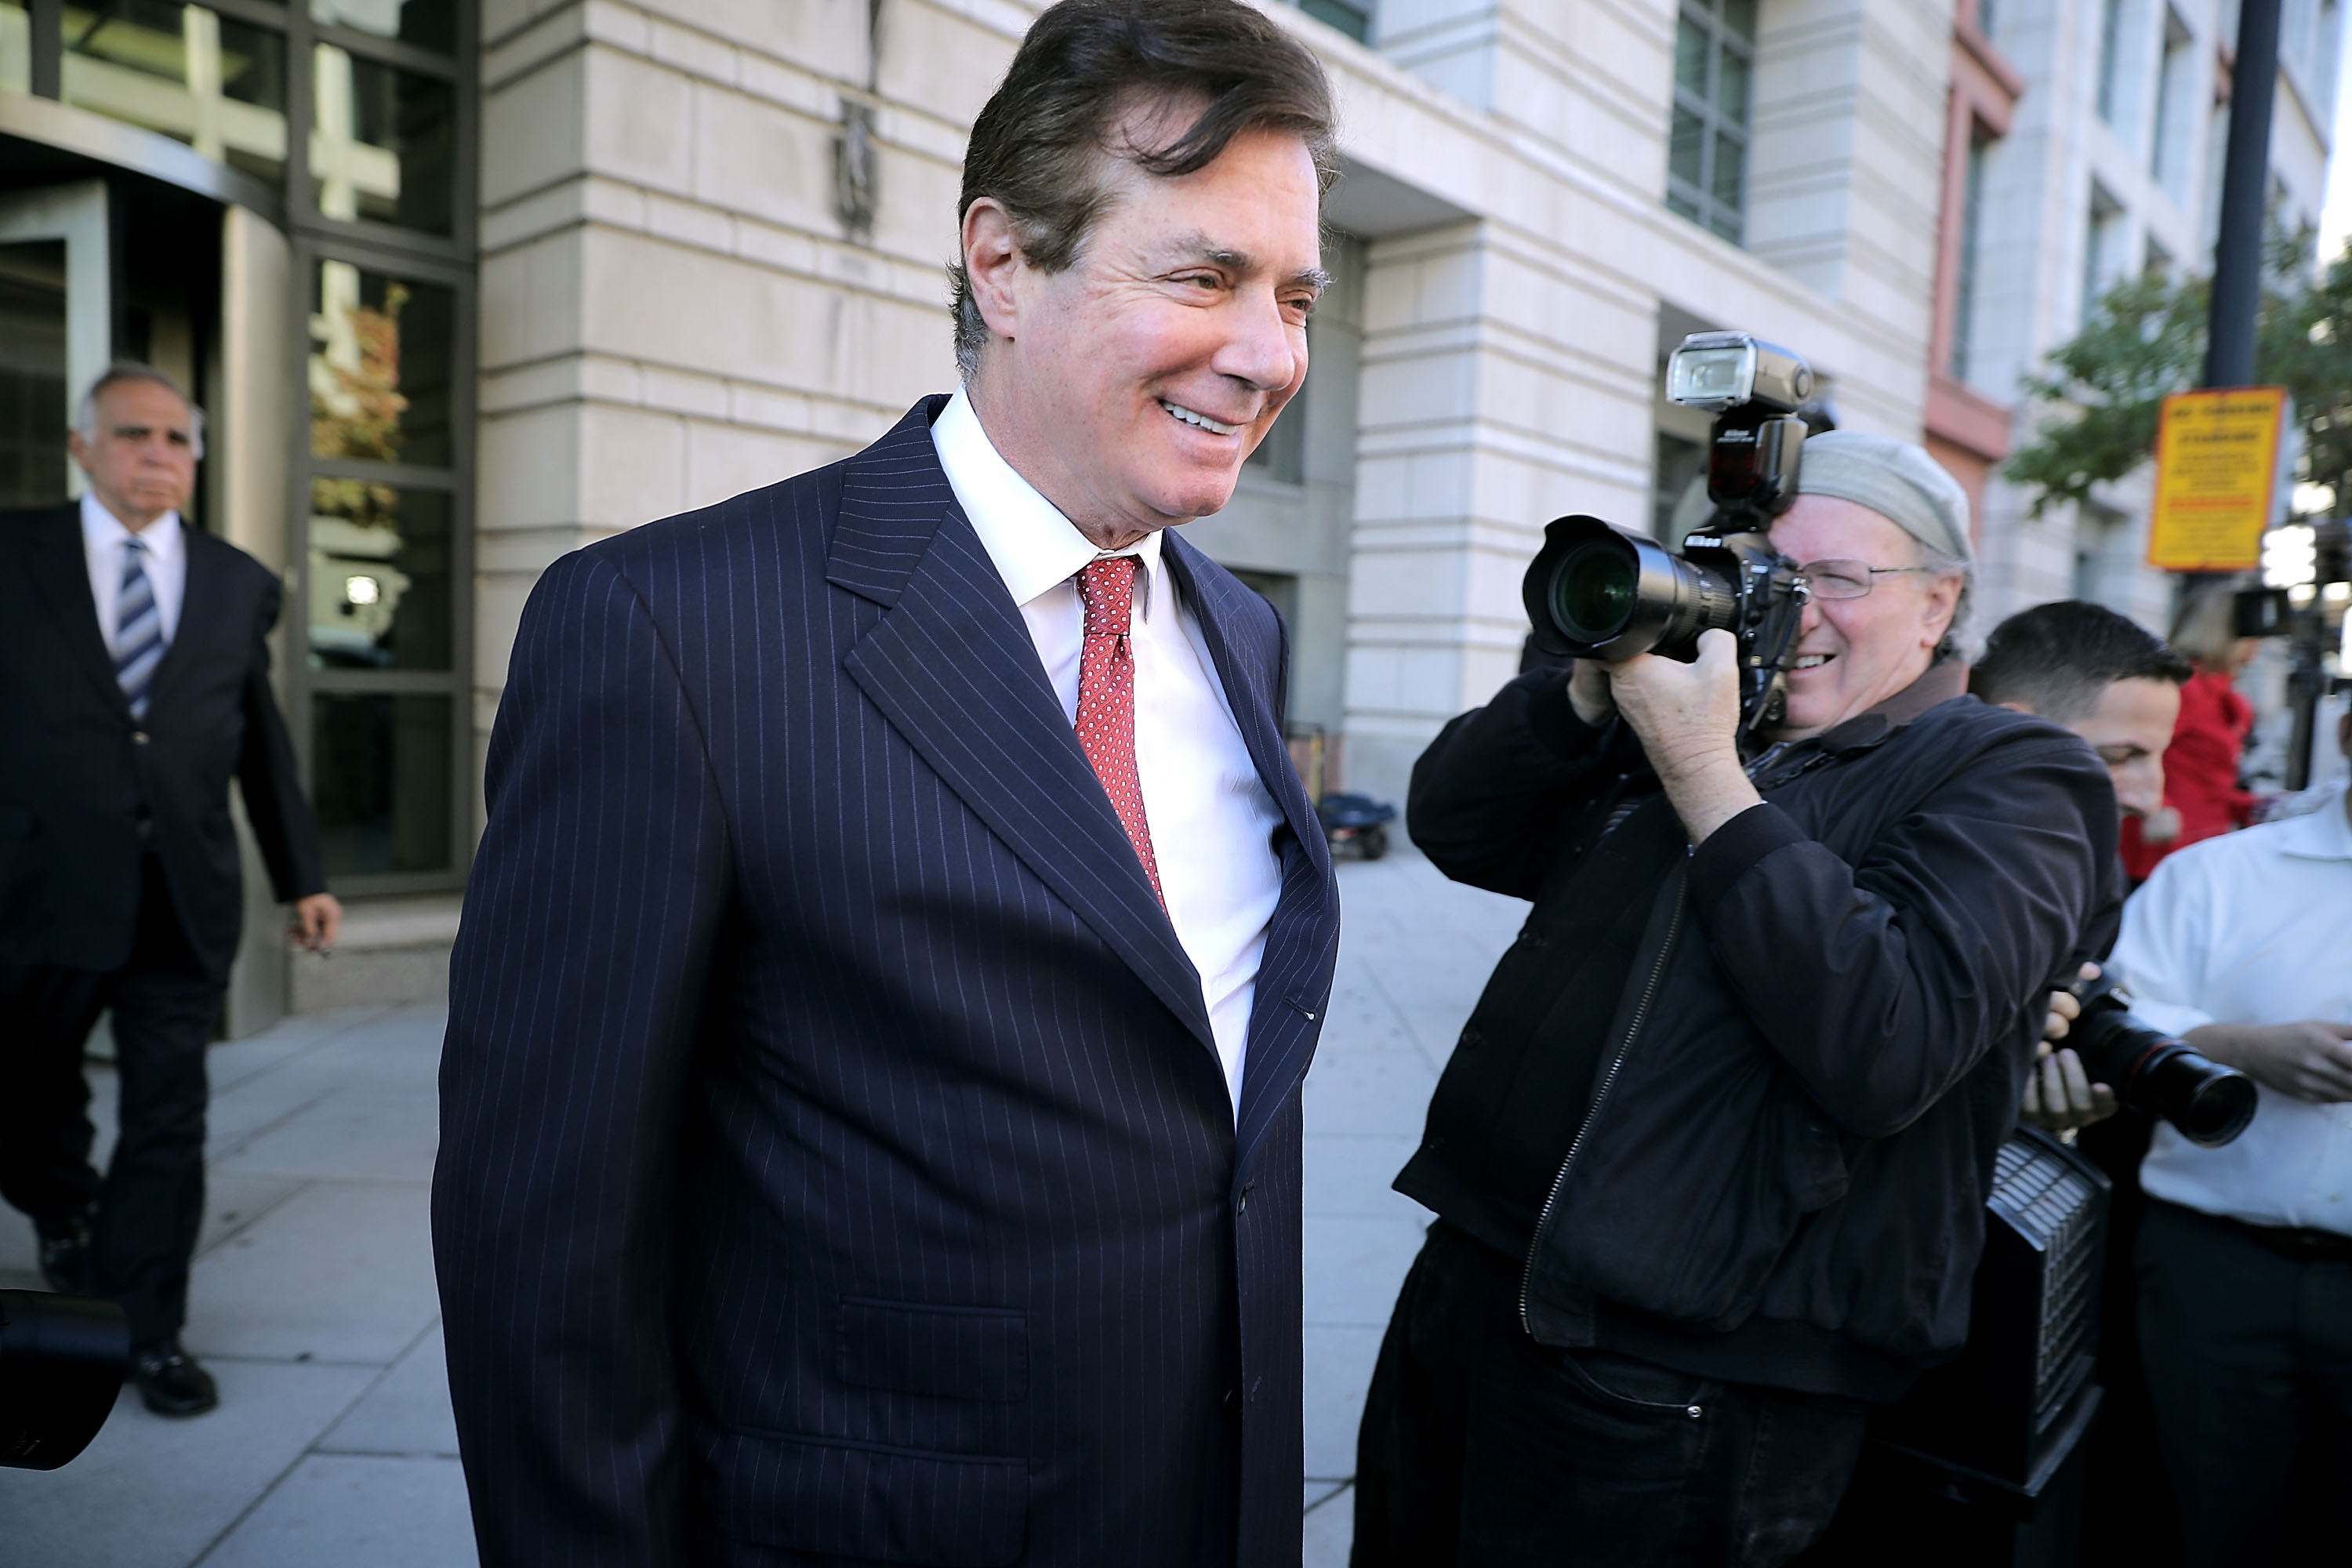 Former Trump campaign manager Paul Manafort leaves the Prettyman Federal Courthouse following a hearing November 2, 2017 in Washington, DC. (Chip Somodevilla—Getty Images)